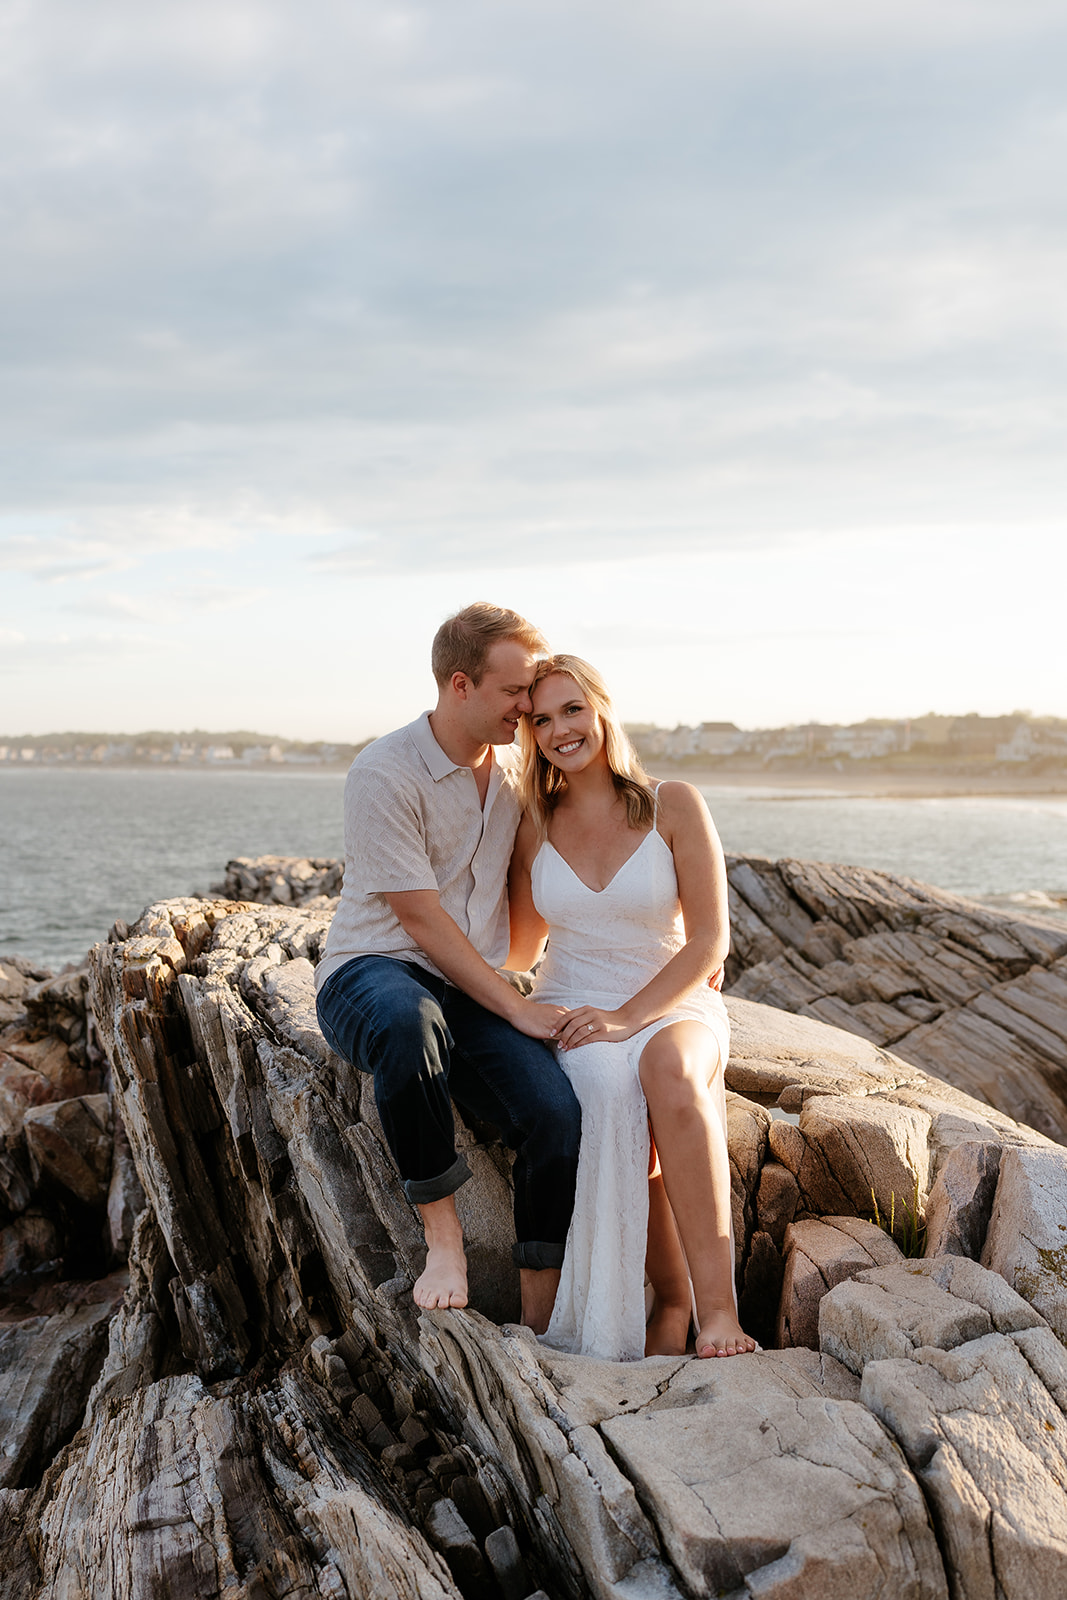 A couple sitting closely on rocky coastal terrain, smiling and embracing each other, with a serene water backdrop during sunset.